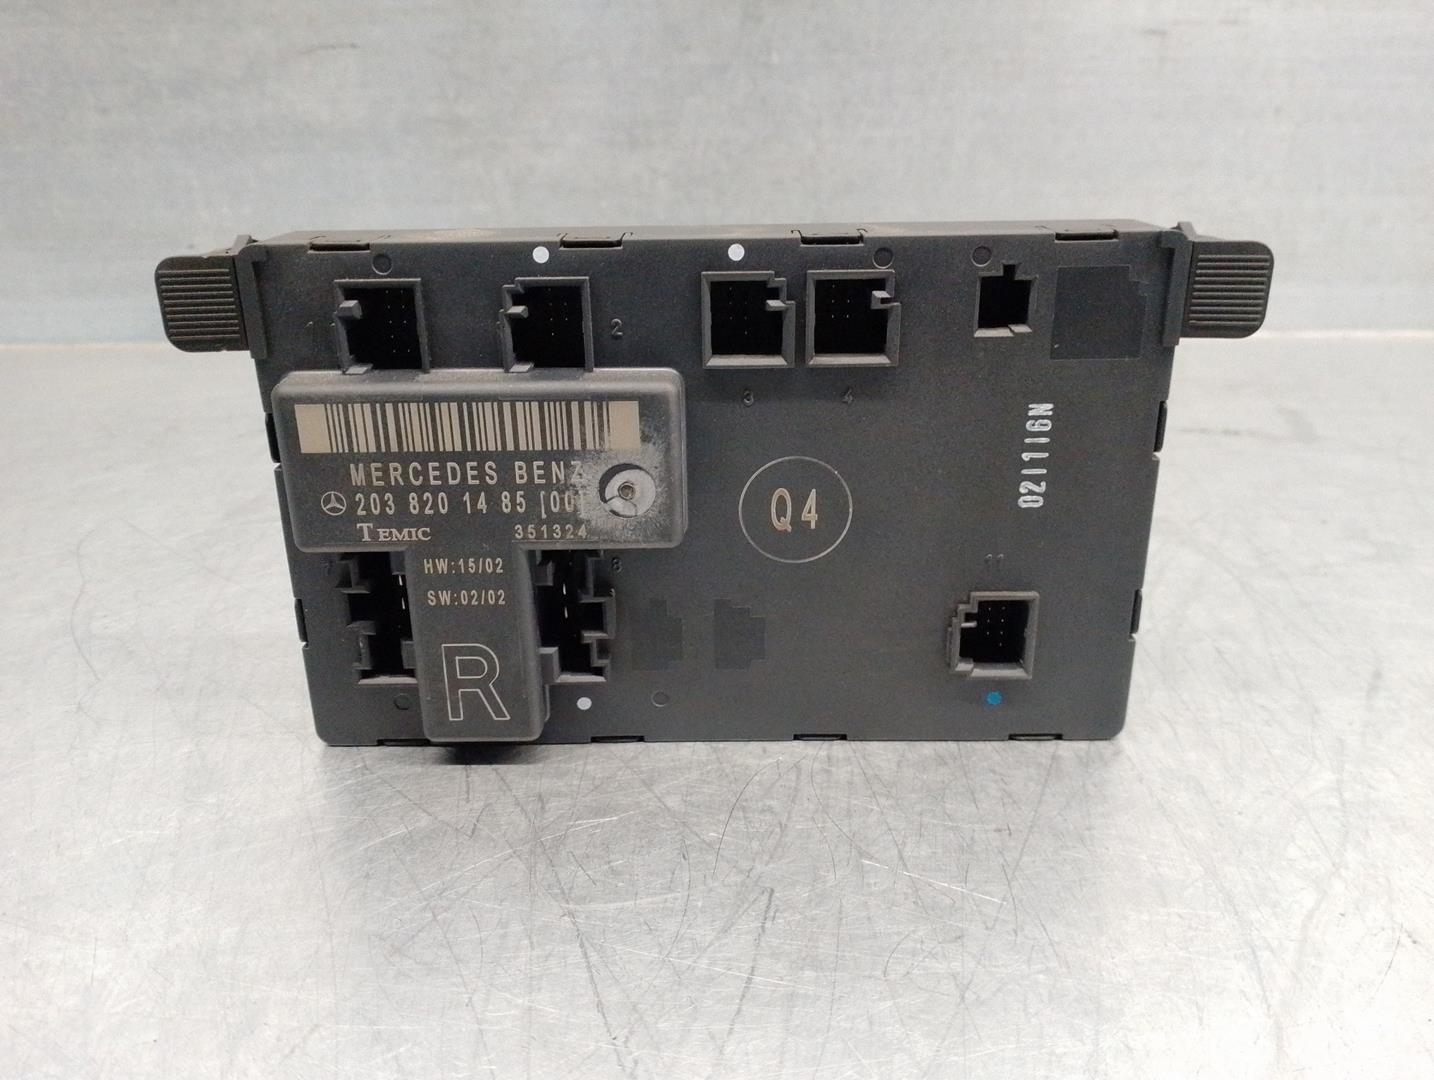 MERCEDES-BENZ C-Class W203/S203/CL203 (2000-2008) Other Control Units 2038201485, 351324, TEMIC 19915665